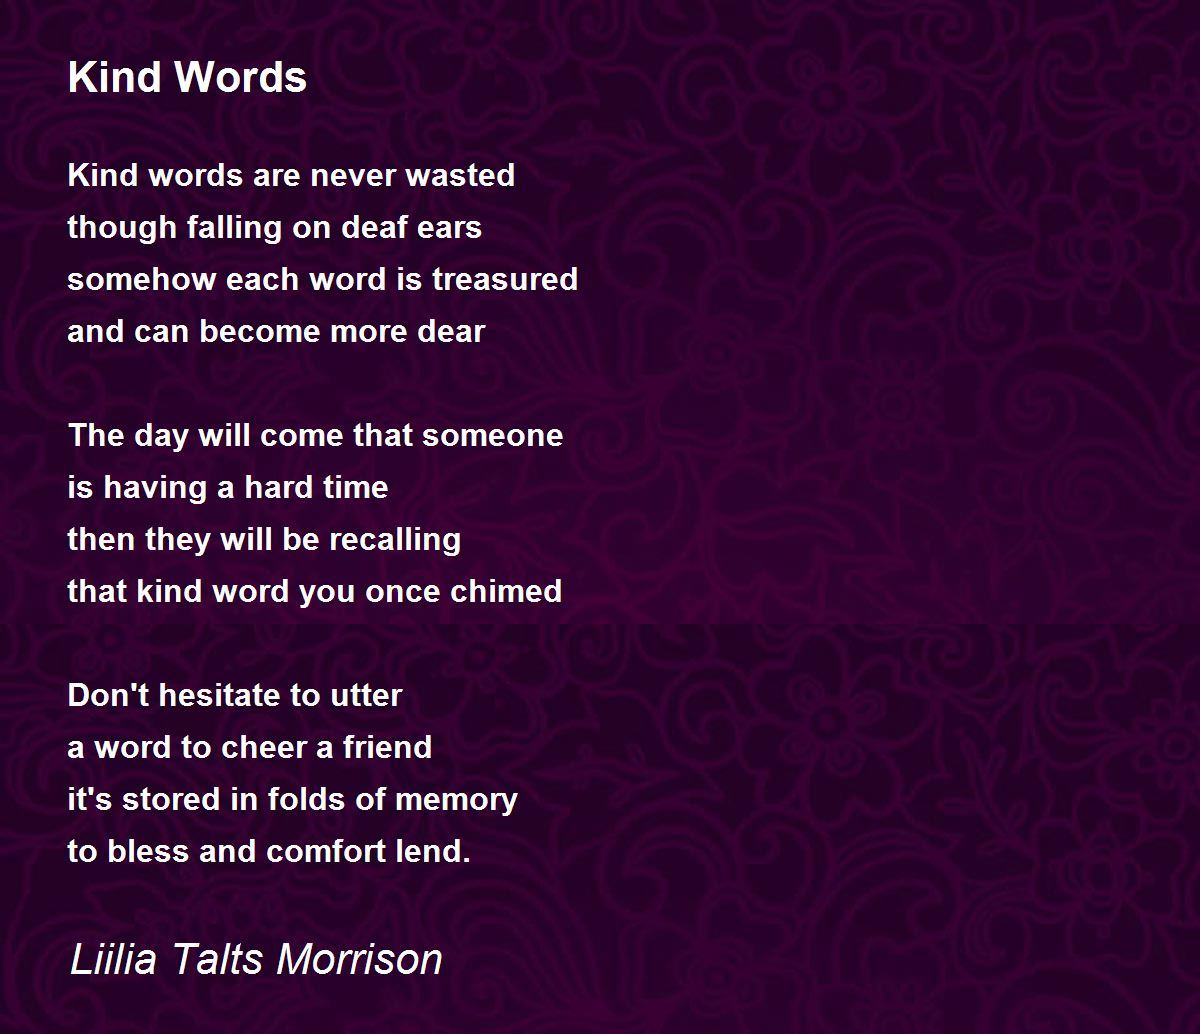 the word kind